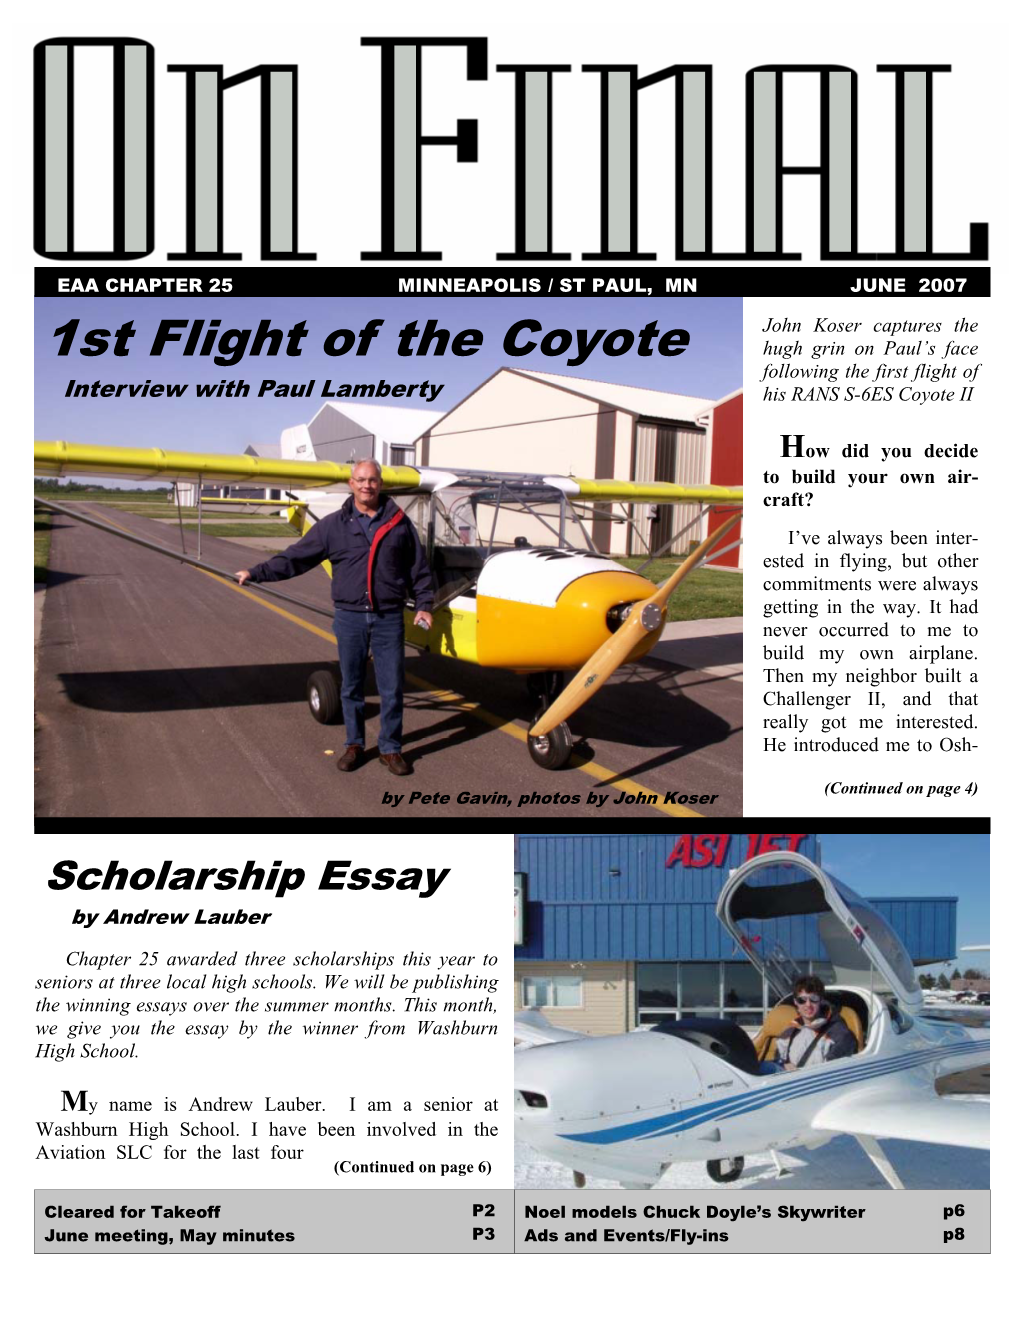 1St Flight of the Coyote Hugh Grin on Paul’S Face Following the First Flight of Interview with Paul Lamberty His RANS S-6ES Coyote II